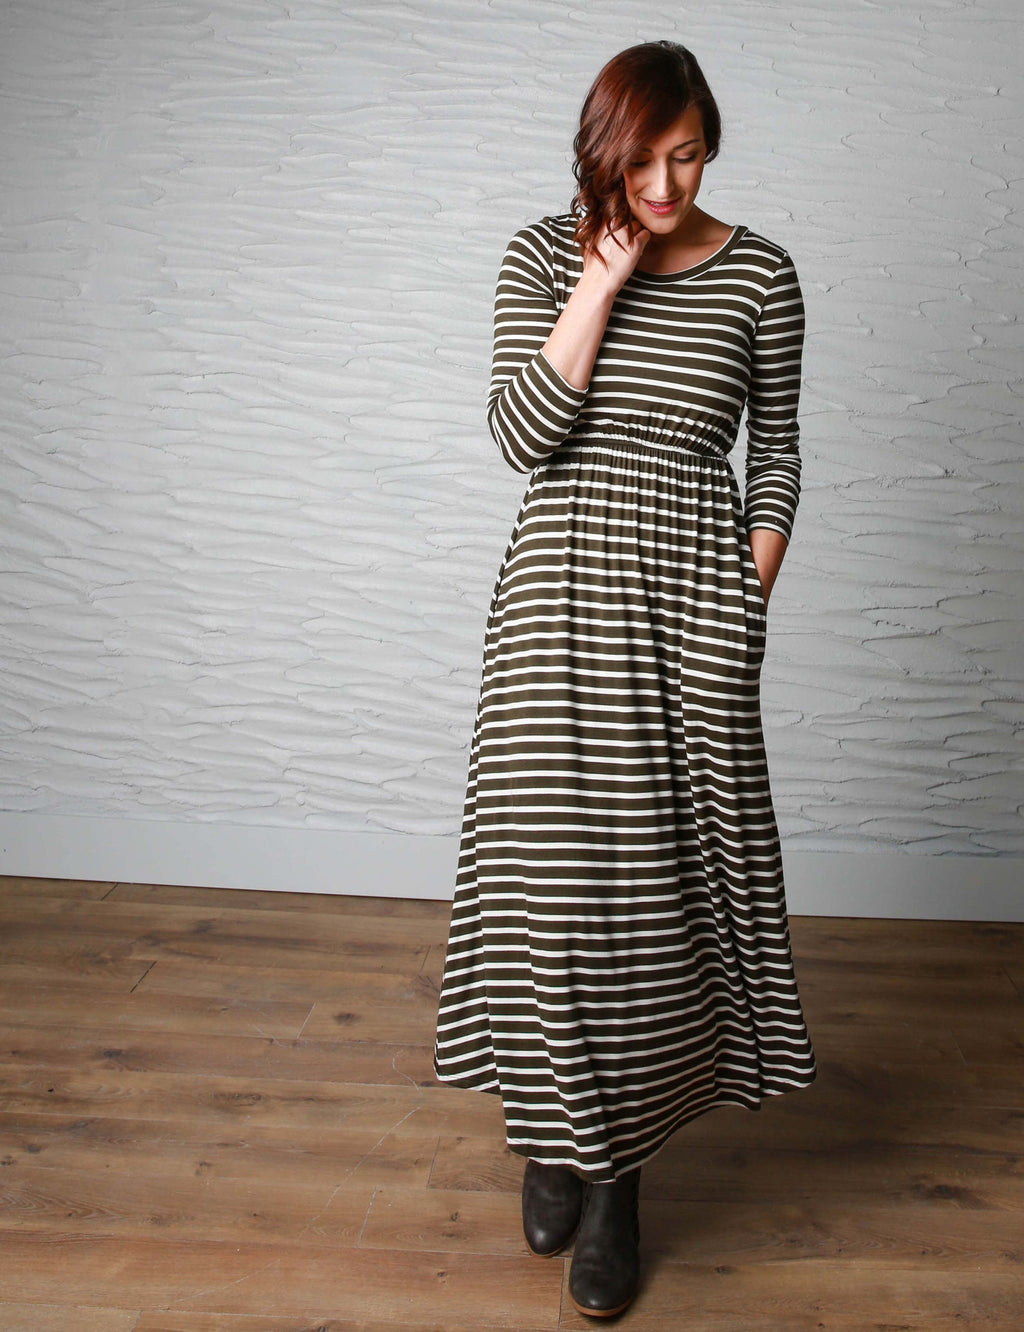 The Best in Stripes - Dresses For Winter